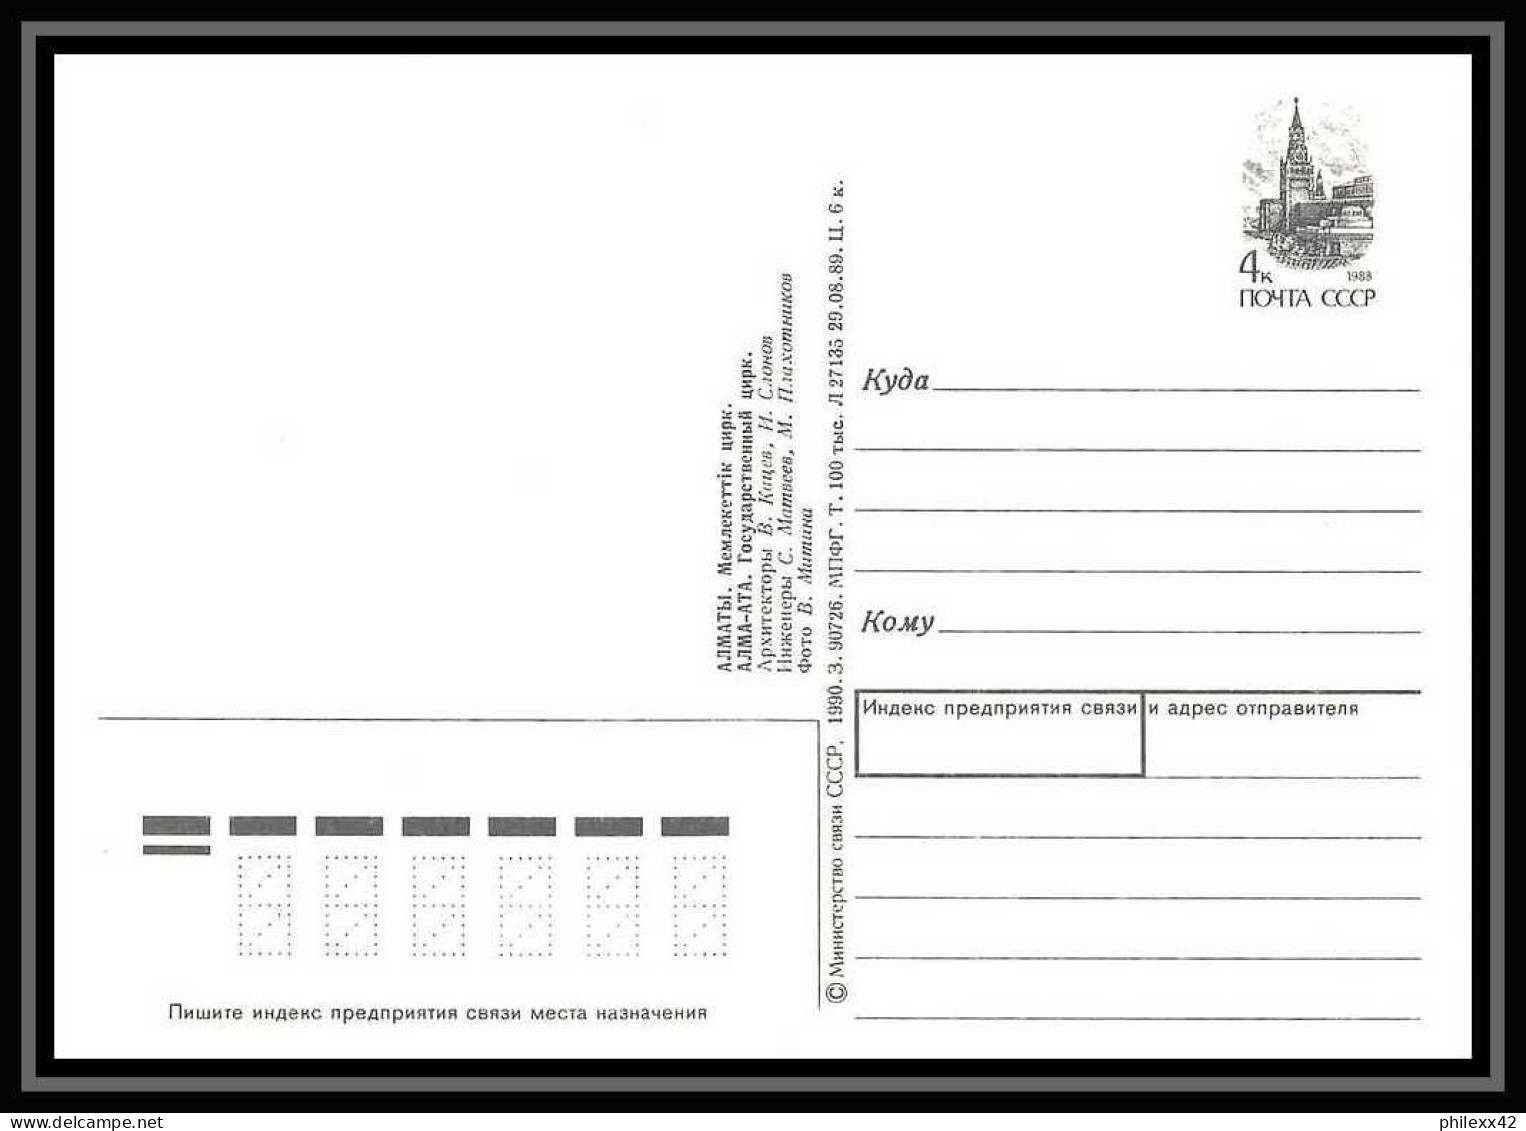 10033/ Espace (space) 9 Entier postal (Stamped Stationery) 29/8/1989 (urss USSR)